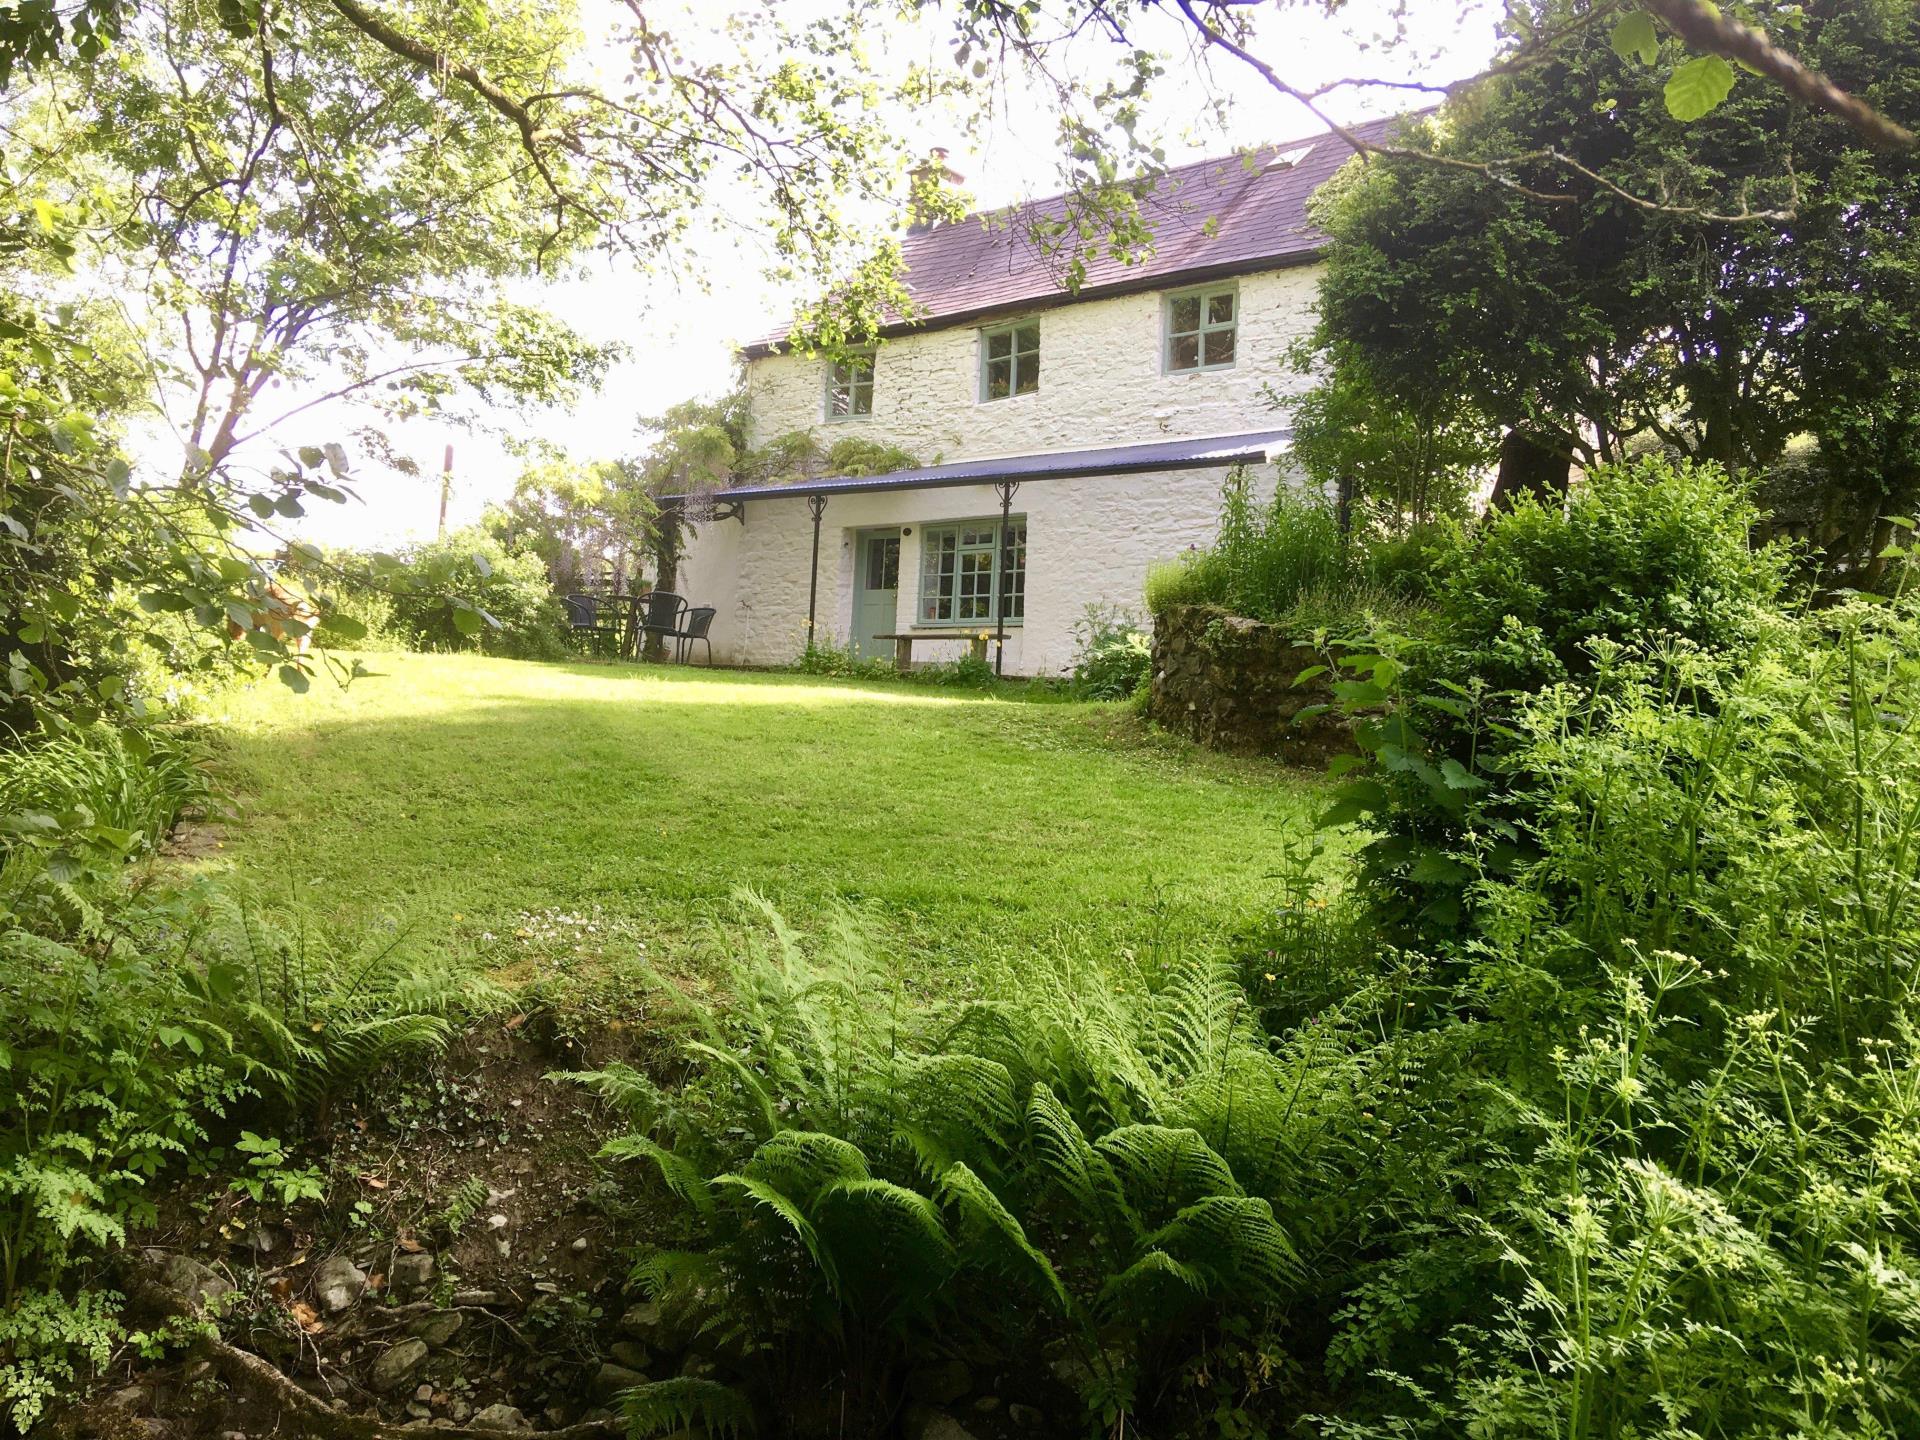 Fairytale streamside cottage with large garden